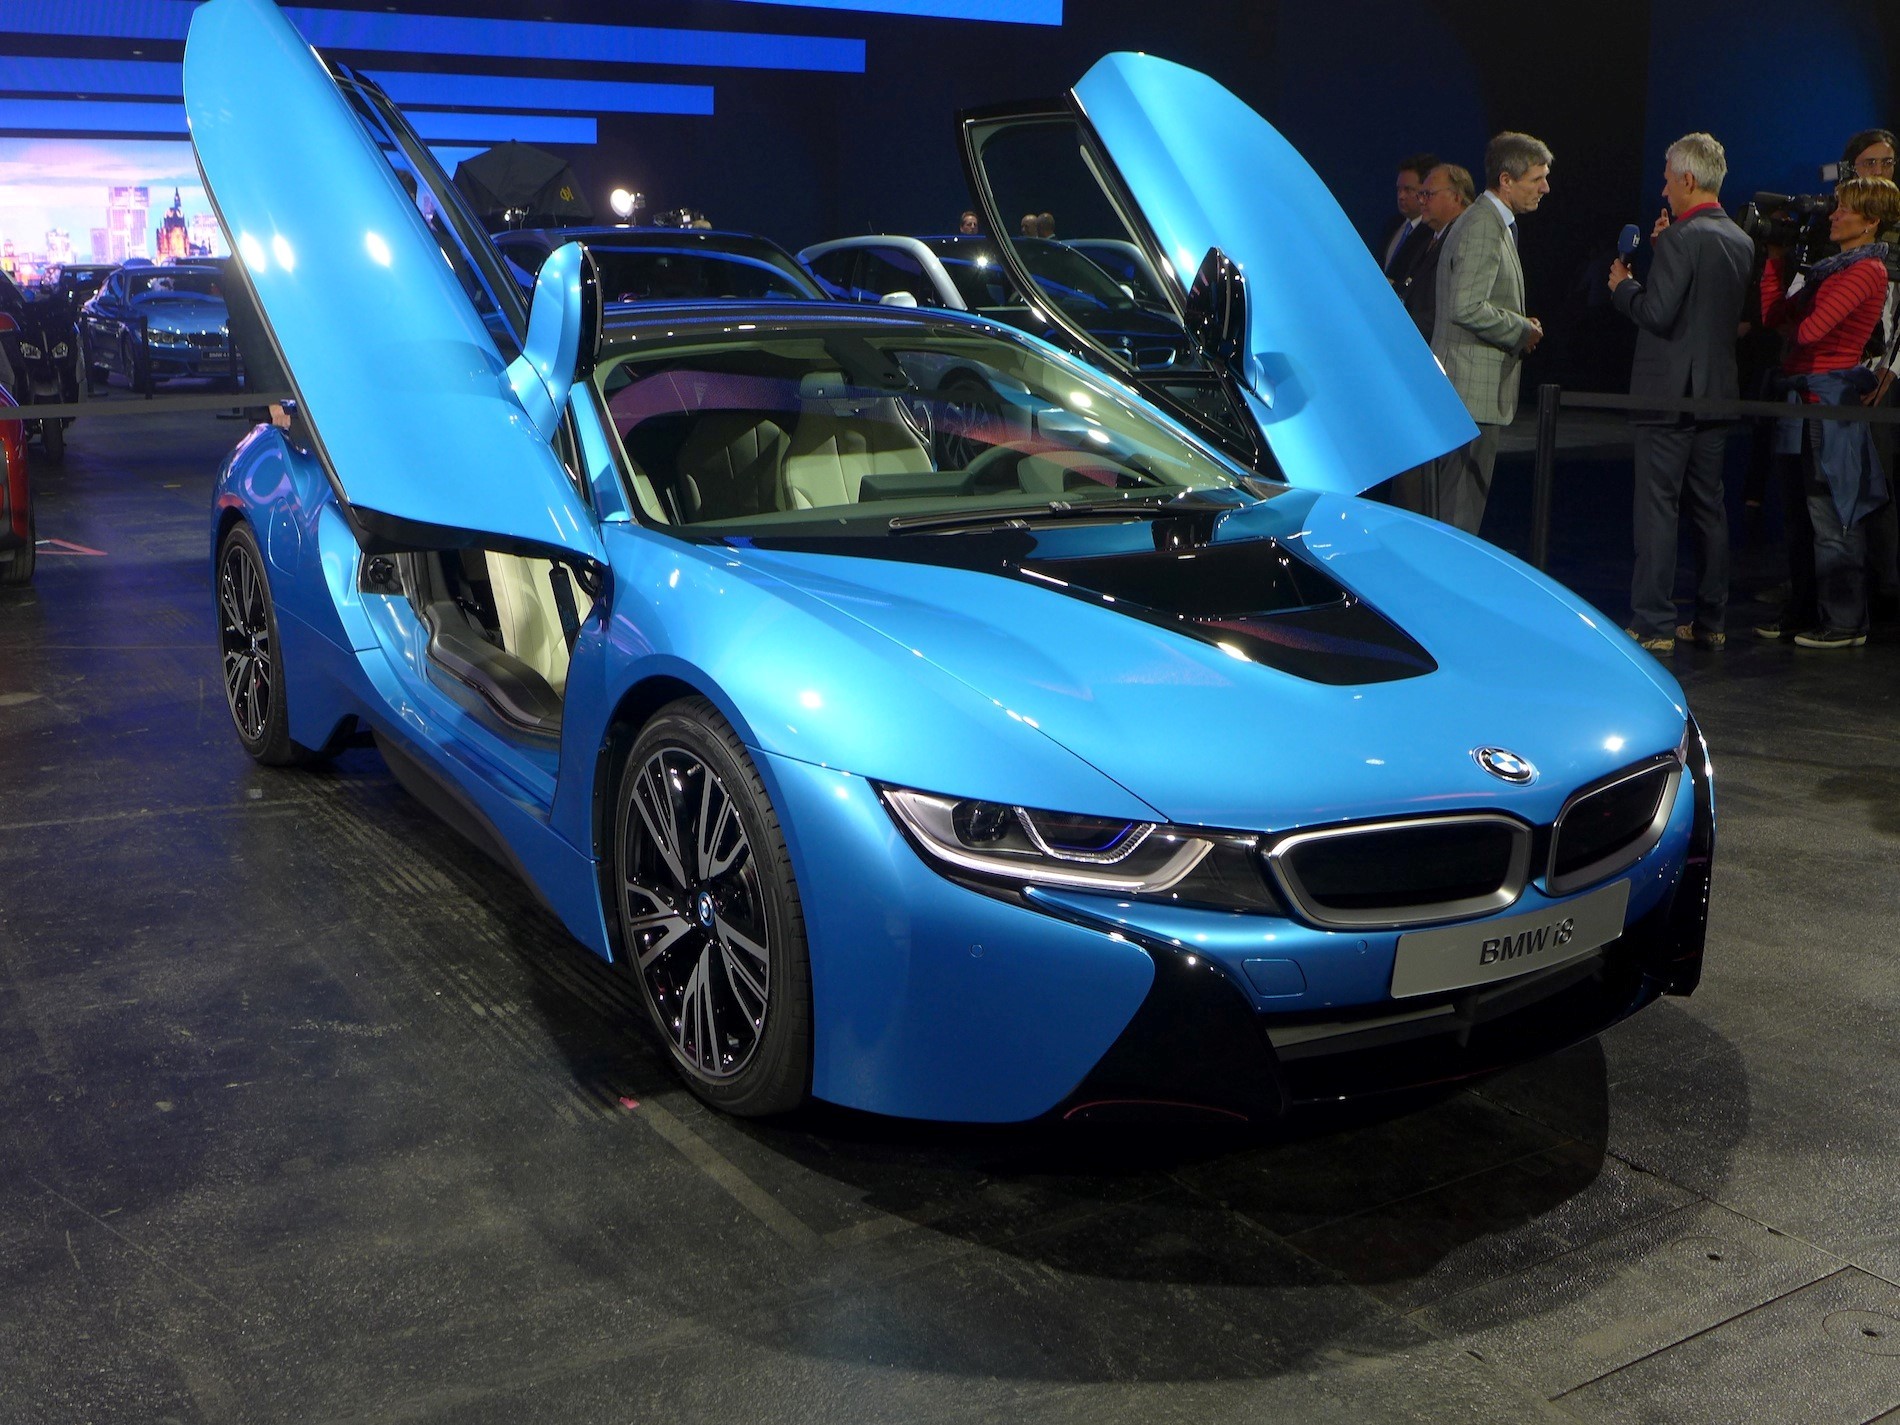 Bmw I8 Luxury Two Seater Car With Open Door